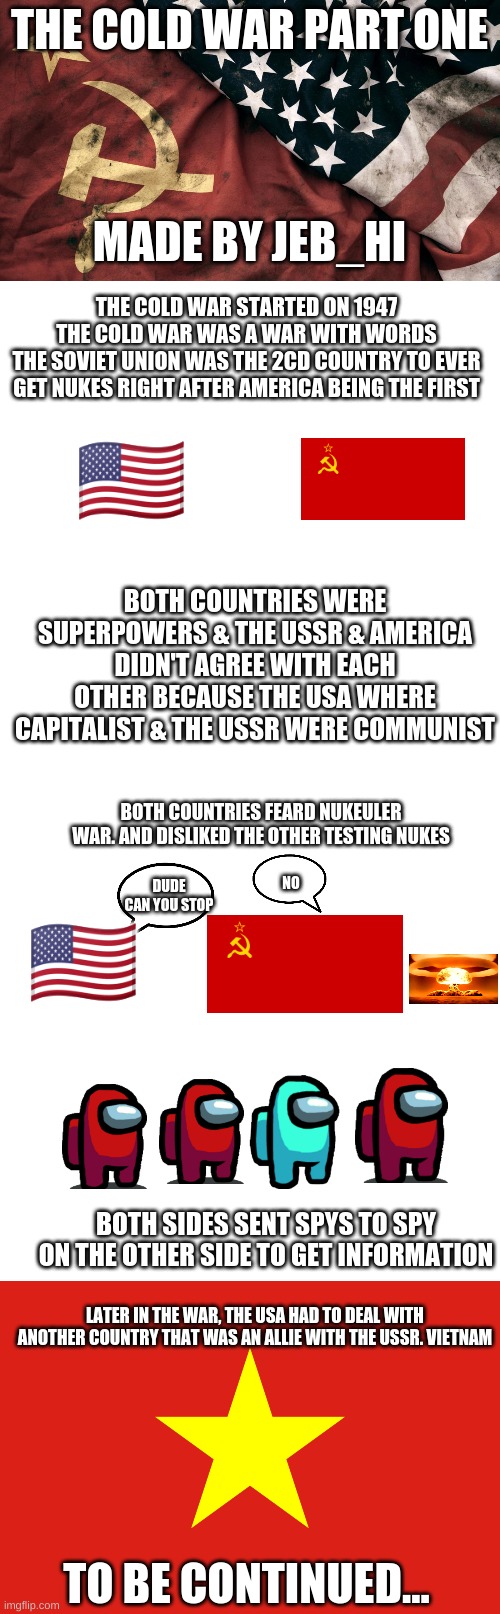 The Cold War Part One |  THE COLD WAR PART ONE; MADE BY JEB_HI; THE COLD WAR STARTED ON 1947
THE COLD WAR WAS A WAR WITH WORDS
THE SOVIET UNION WAS THE 2CD COUNTRY TO EVER GET NUKES RIGHT AFTER AMERICA BEING THE FIRST; 🇺🇸; BOTH COUNTRIES WERE SUPERPOWERS & THE USSR & AMERICA DIDN'T AGREE WITH EACH OTHER BECAUSE THE USA WHERE CAPITALIST & THE USSR WERE COMMUNIST; BOTH COUNTRIES FEARD NUKEULER WAR. AND DISLIKED THE OTHER TESTING NUKES; 🇺🇸; DUDE CAN YOU STOP; NO; BOTH SIDES SENT SPYS TO SPY ON THE OTHER SIDE TO GET INFORMATION; LATER IN THE WAR, THE USA HAD TO DEAL WITH ANOTHER COUNTRY THAT WAS AN ALLIE WITH THE USSR. VIETNAM; TO BE CONTINUED... | image tagged in cold war,memes,blank transparent square | made w/ Imgflip meme maker